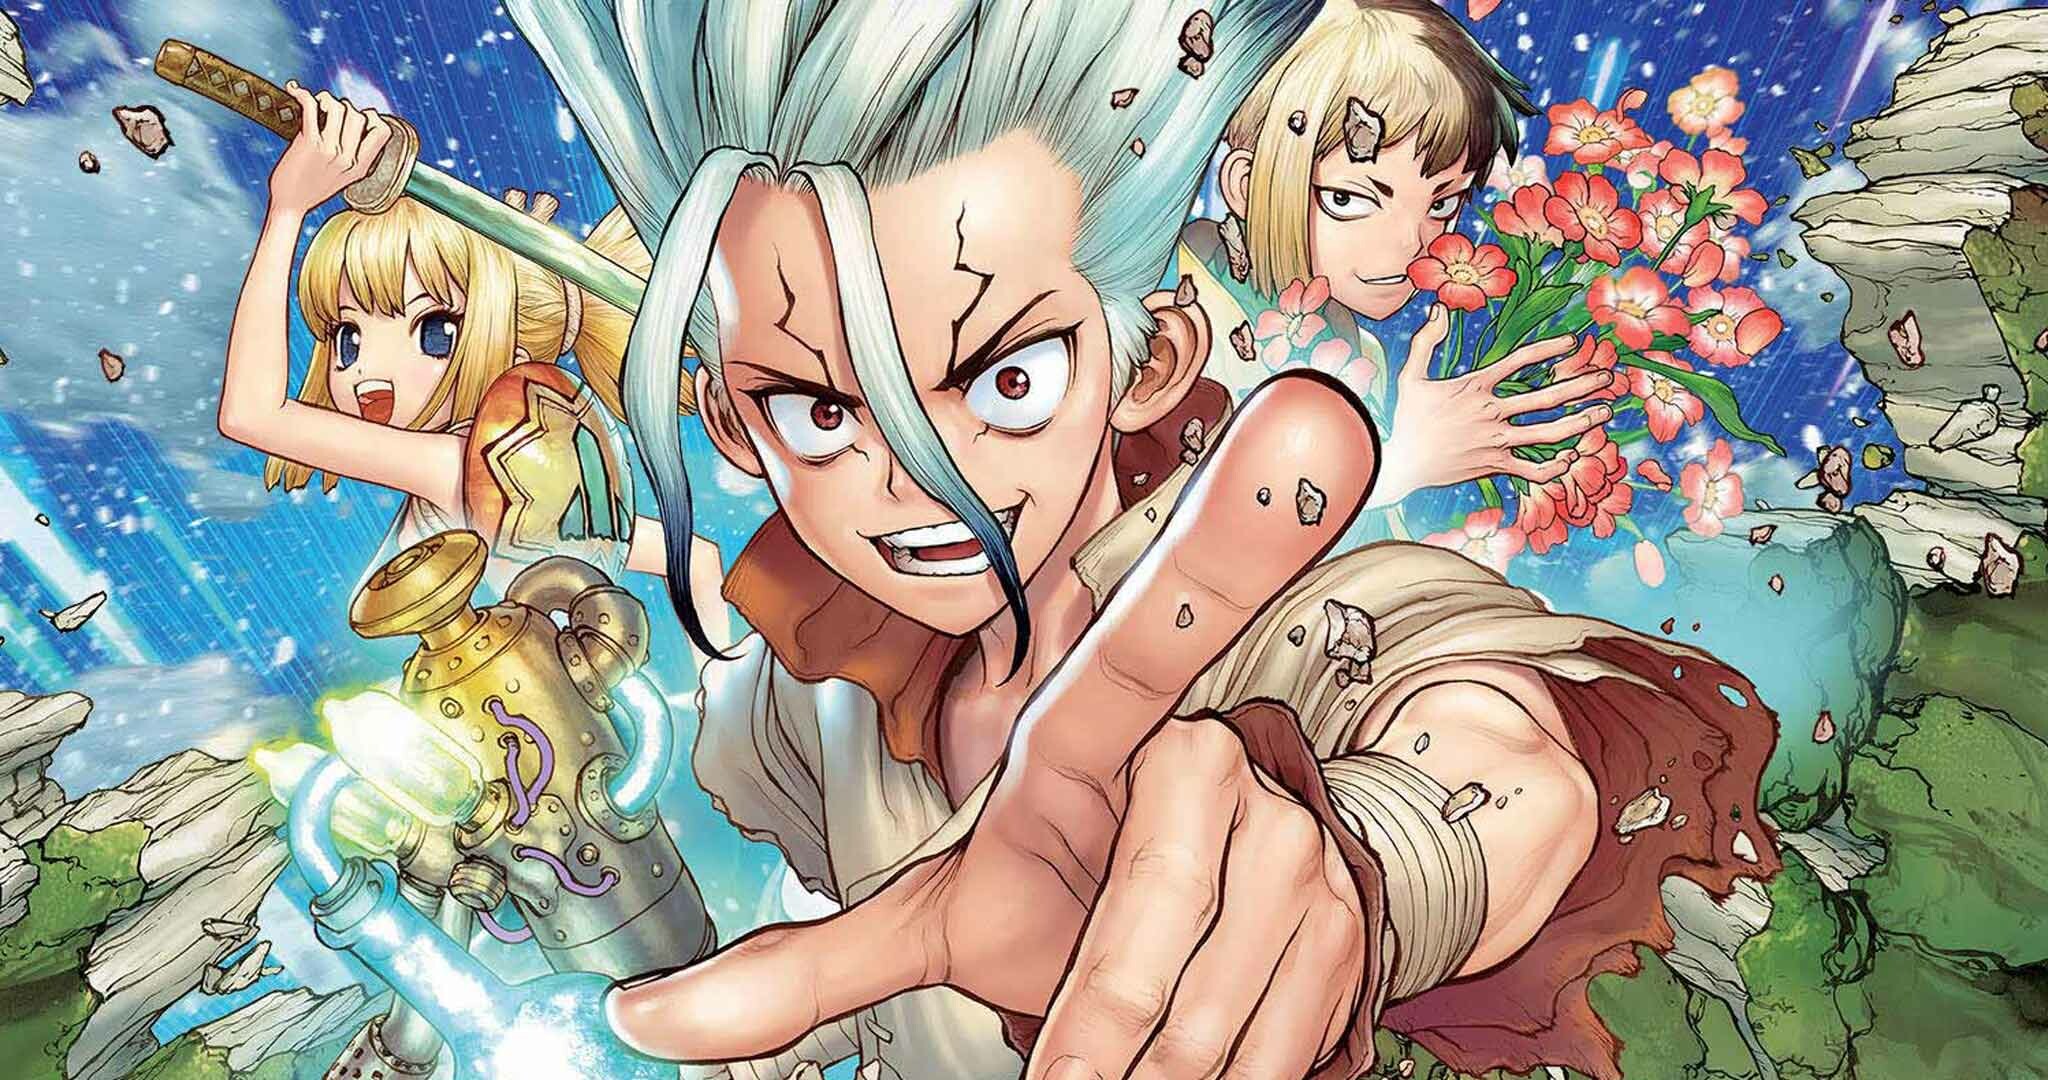 Dr.STONE: Adventure, Comedy, Drama, Science fiction, Anime series. 2050x1080 HD Background.